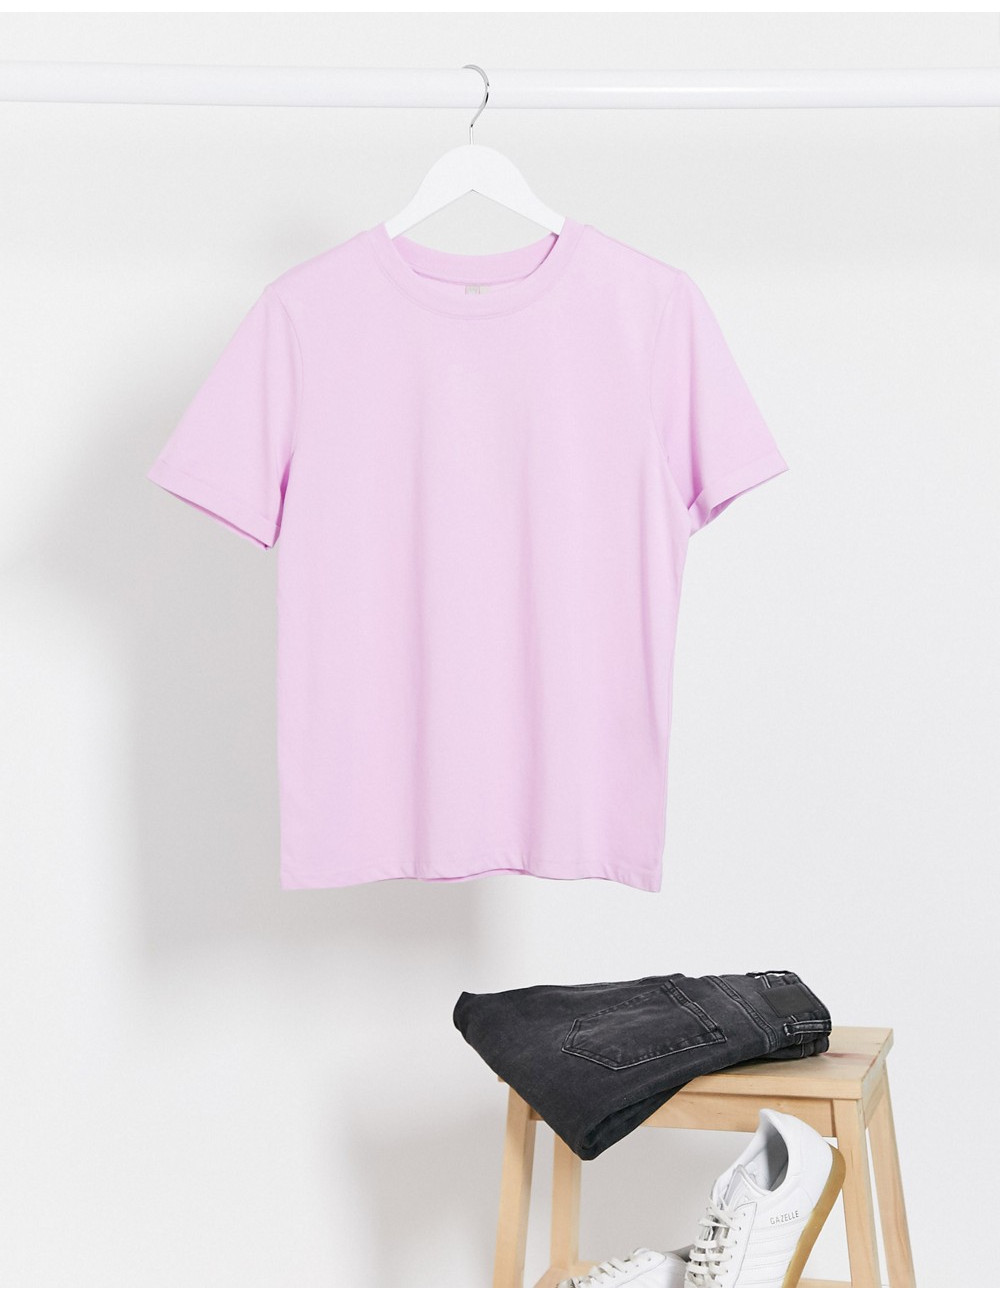 Pieces crew neck t-shirt in...